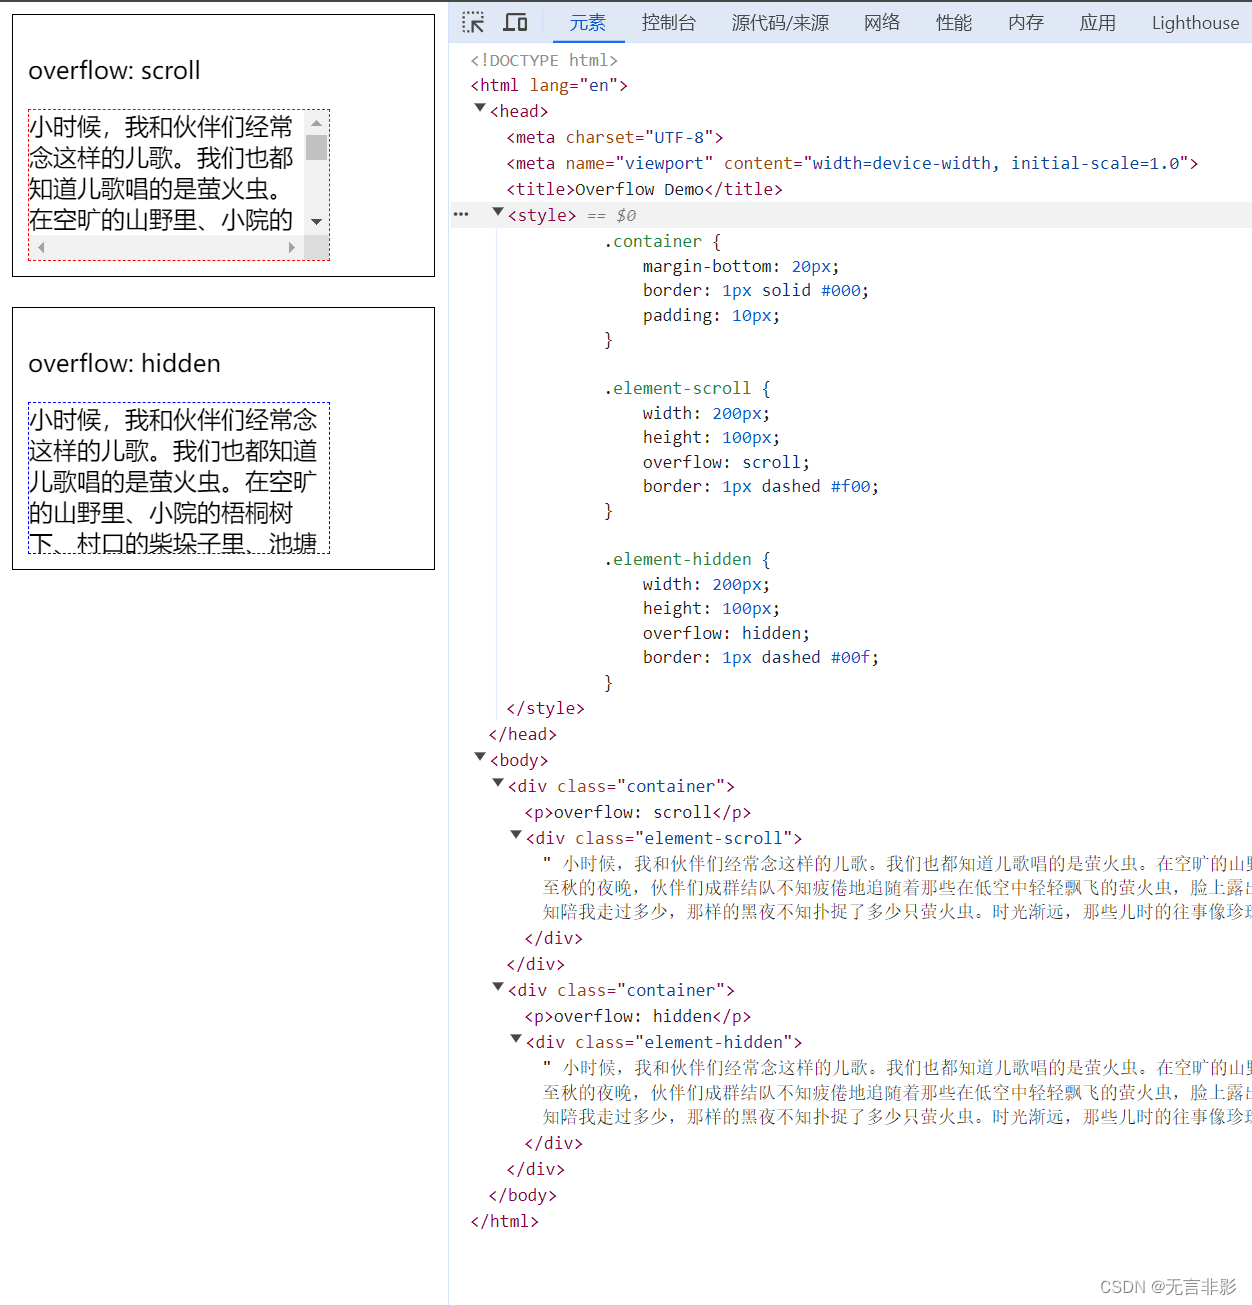 【CSS】overflow<span style='color:red;'>中</span>scroll<span style='color:red;'>和</span>hidden<span style='color:red;'>的</span><span style='color:red;'>区别</span><span style='color:red;'>是</span><span style='color:red;'>什么</span>？